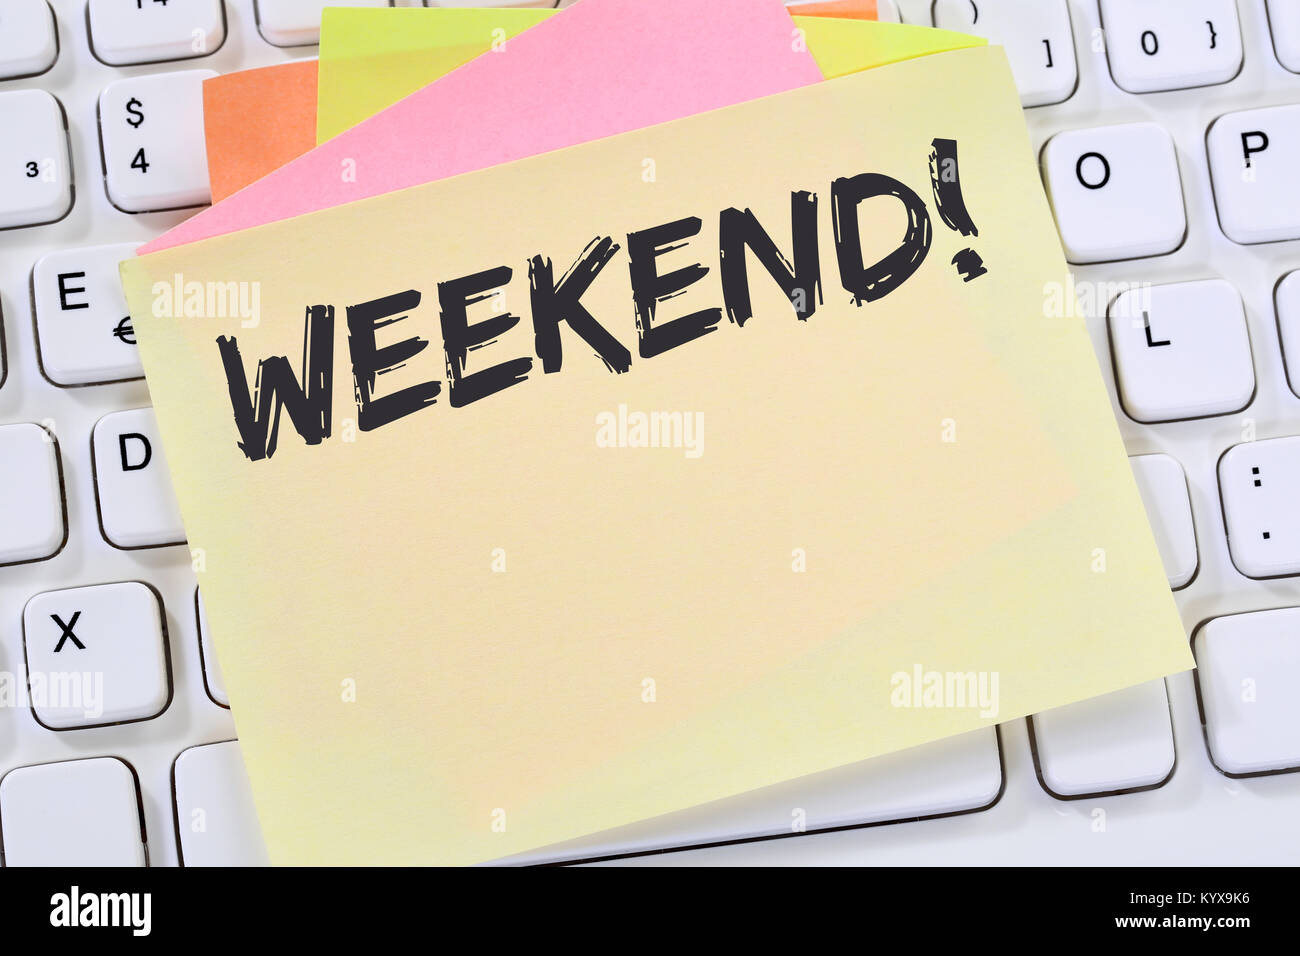 Weekend relax relaxed break business concept free time freetime leisure note paper computer keyboard Stock Photo